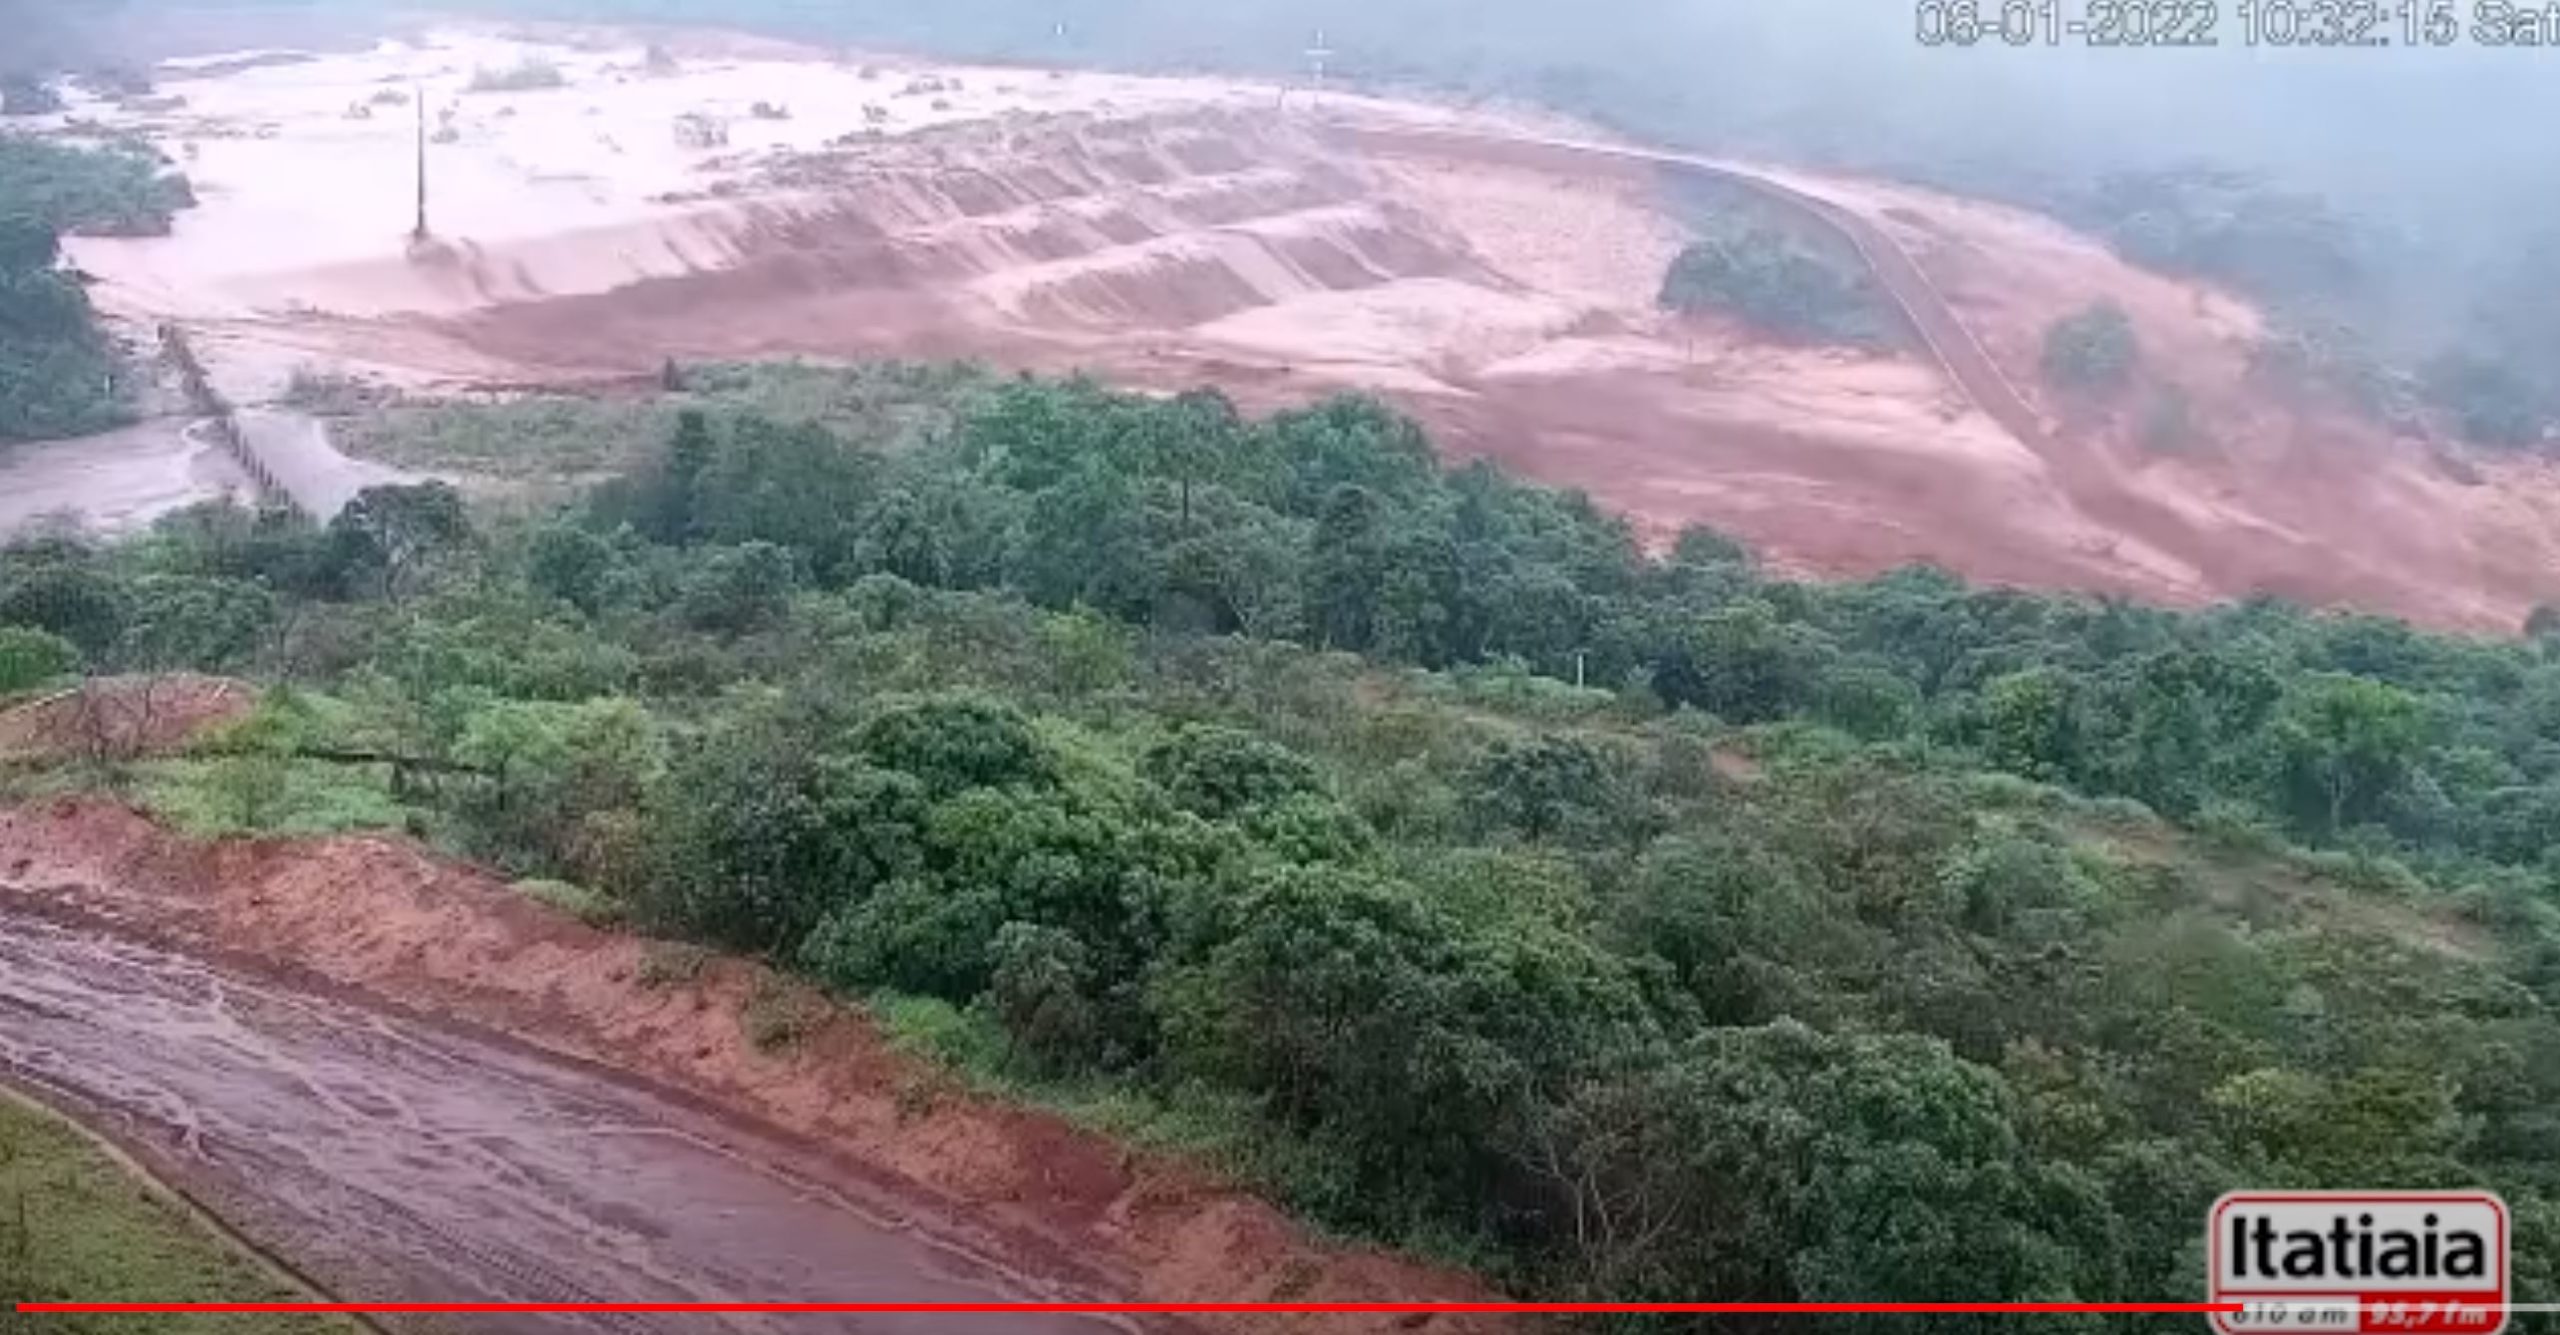 The Pau Branco landslide – video of the overtopping of the dam